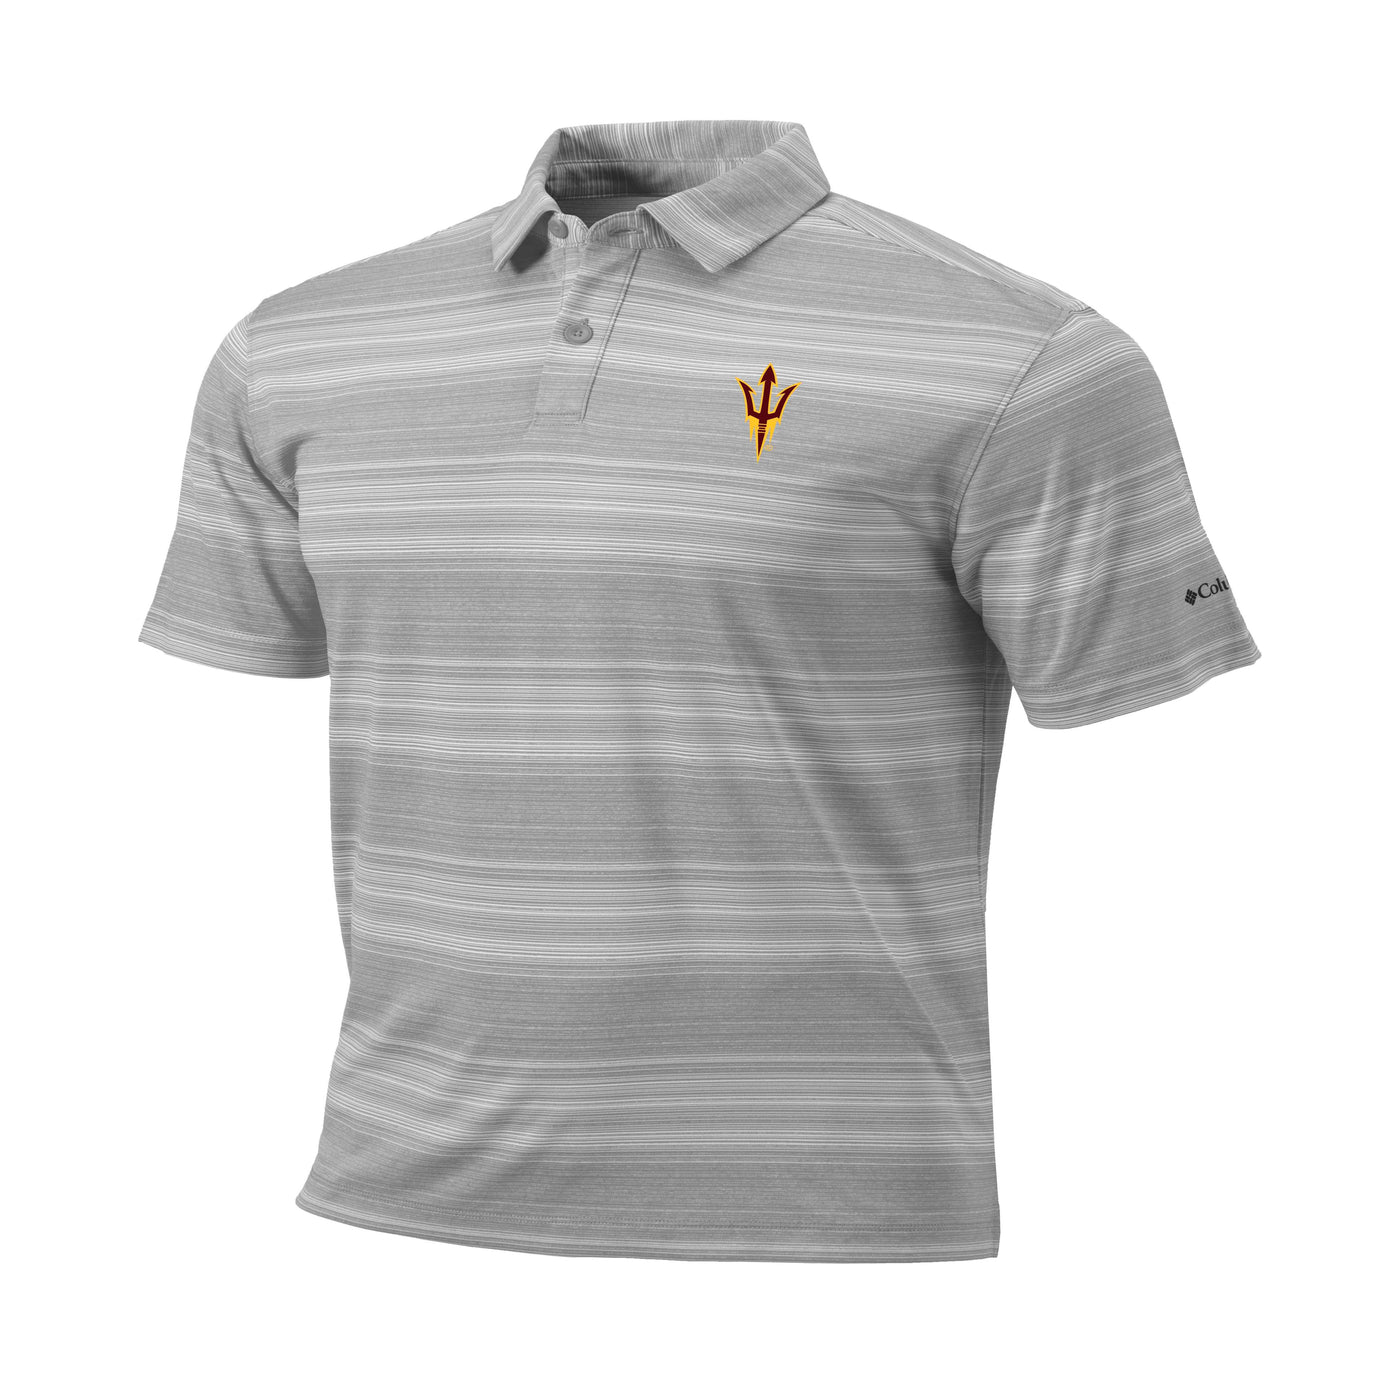 ASU Polo gray with white horizontal stripe pattern and a pitchfork on upper left side of chest